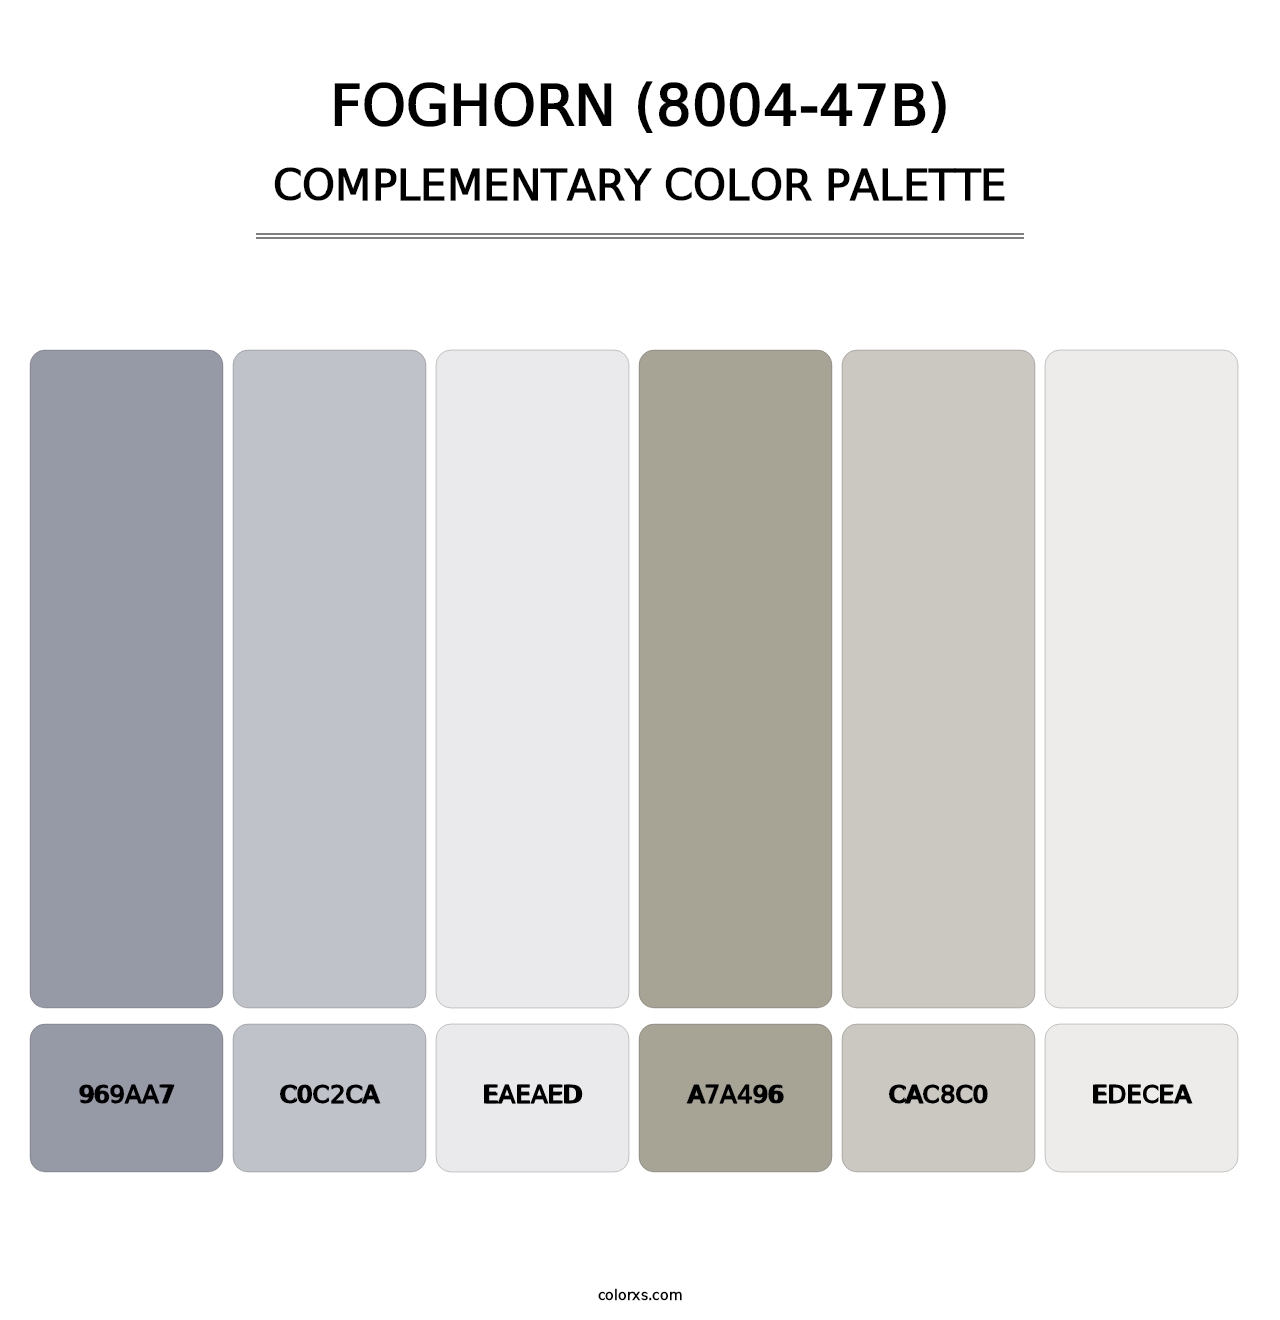 Foghorn (8004-47B) - Complementary Color Palette